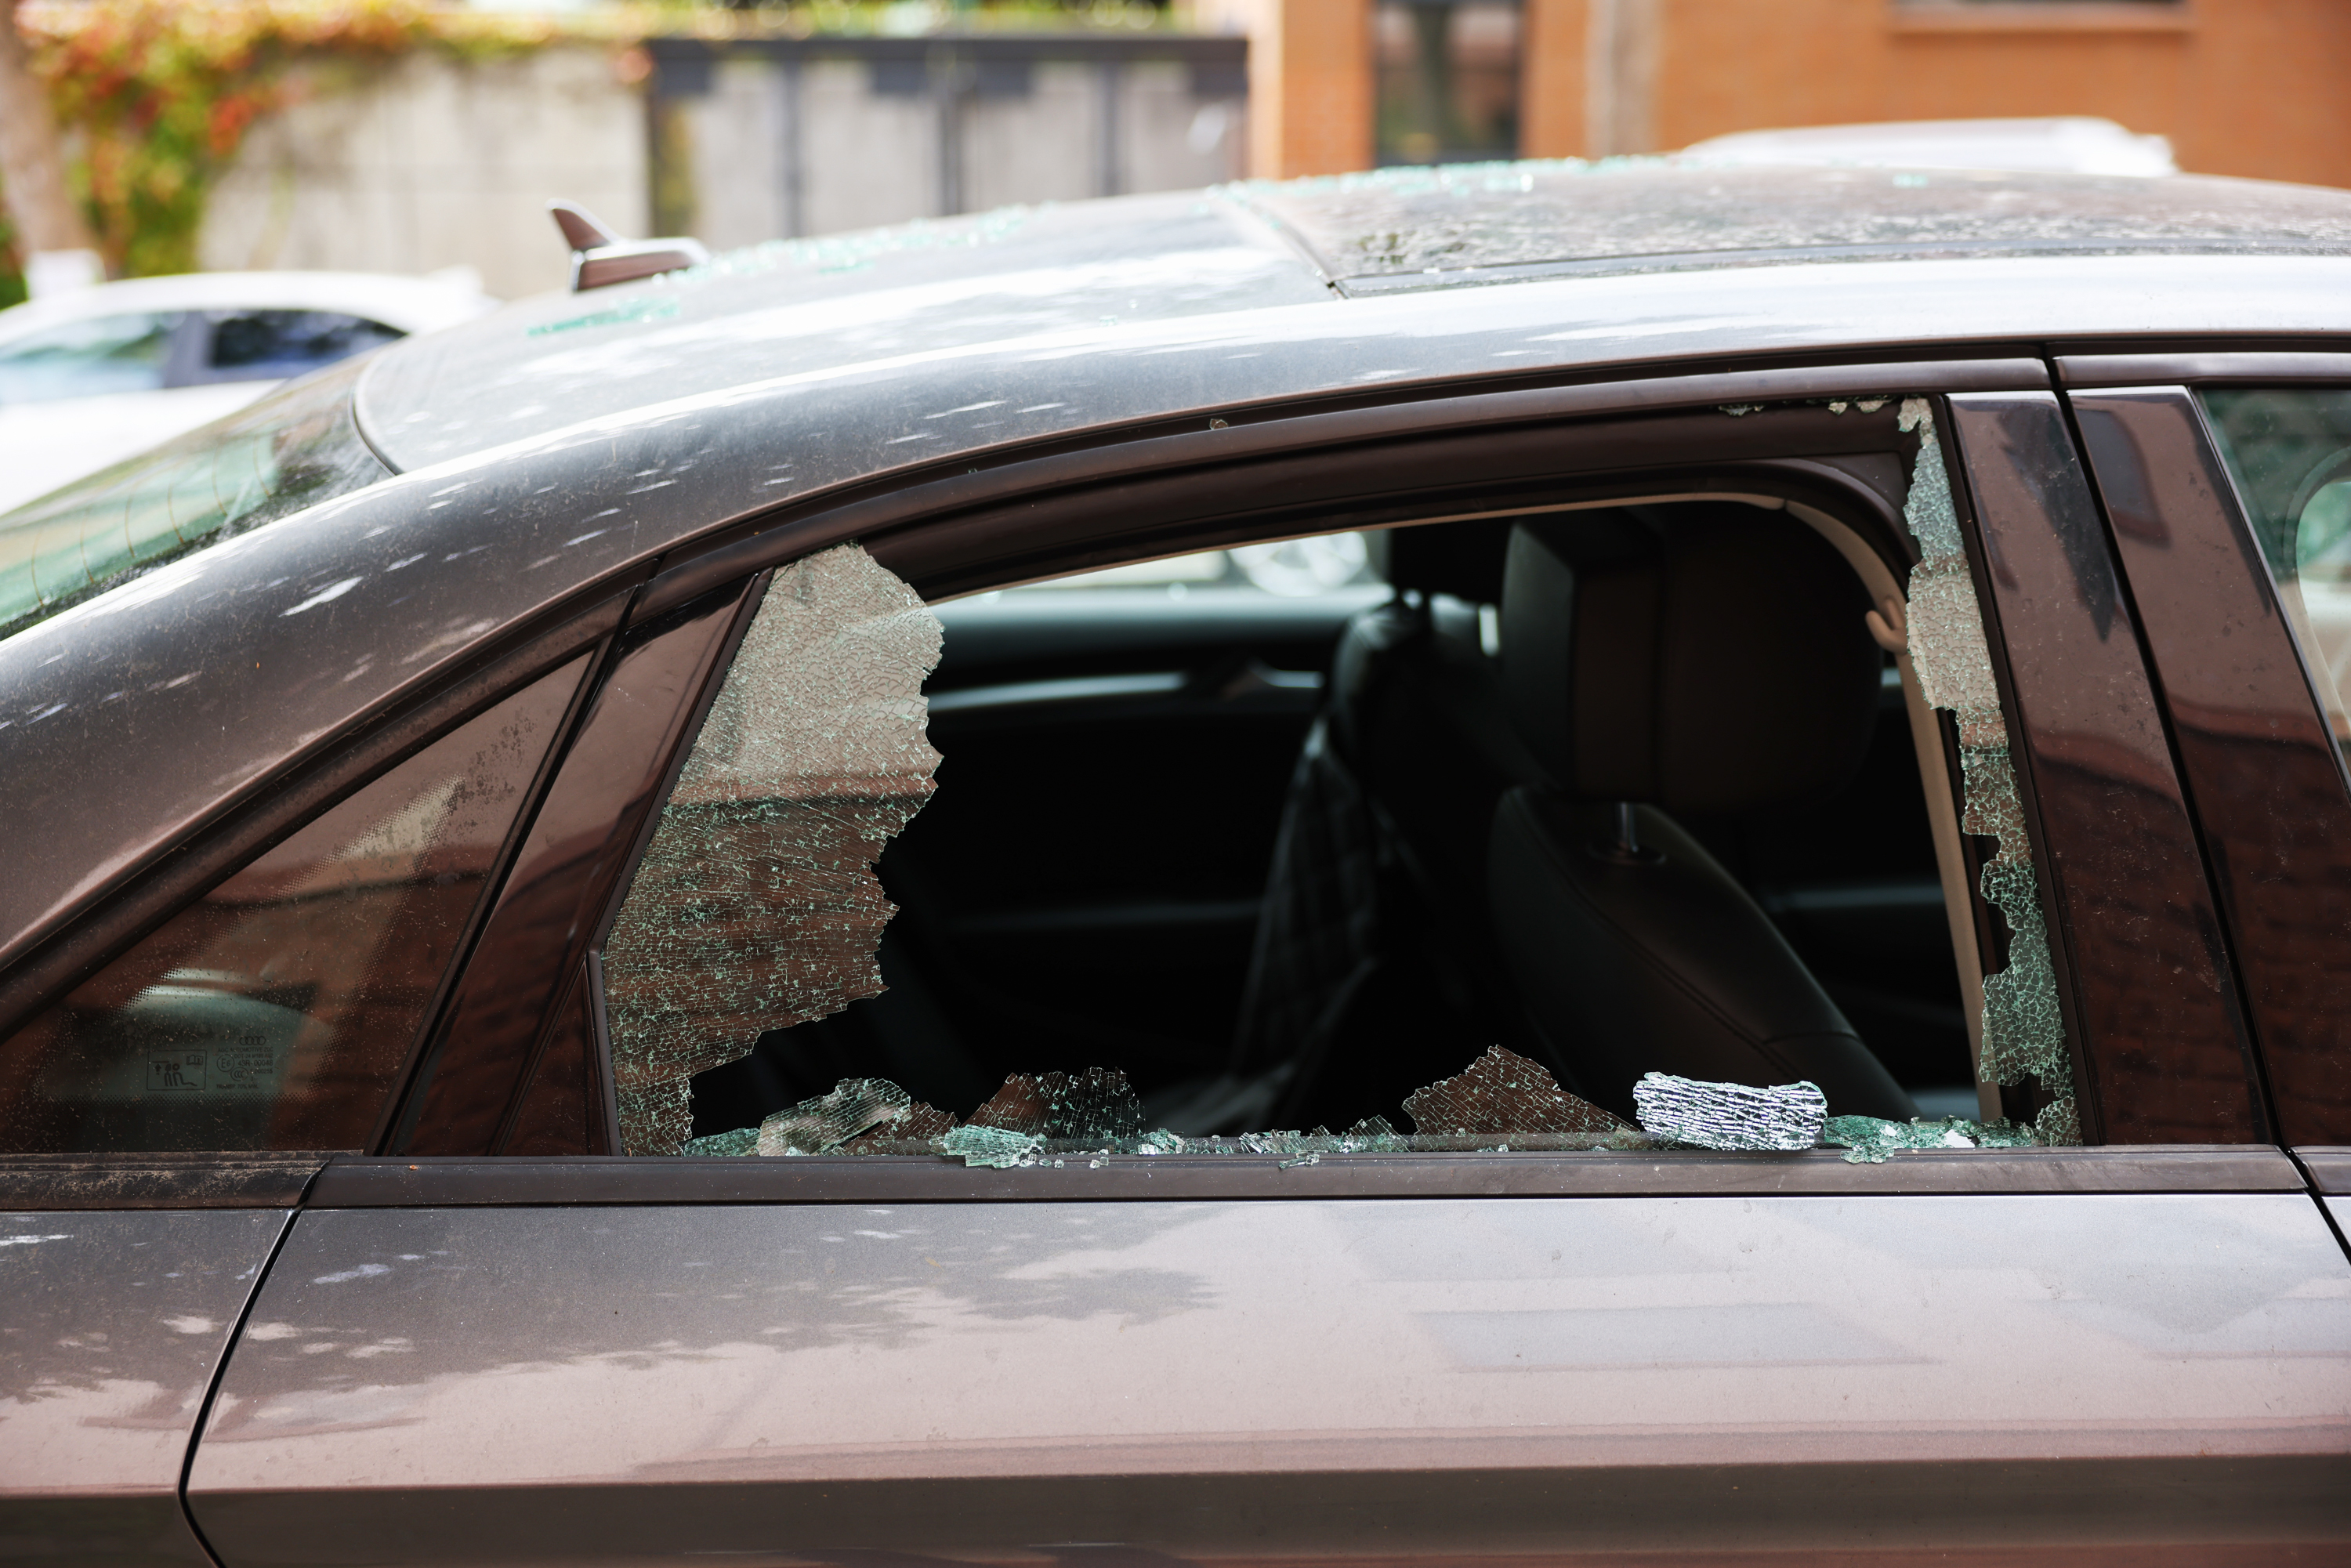 Car Break-In ‘Epidemic’ To Be Examined by San Francisco Lawmakers Thursday